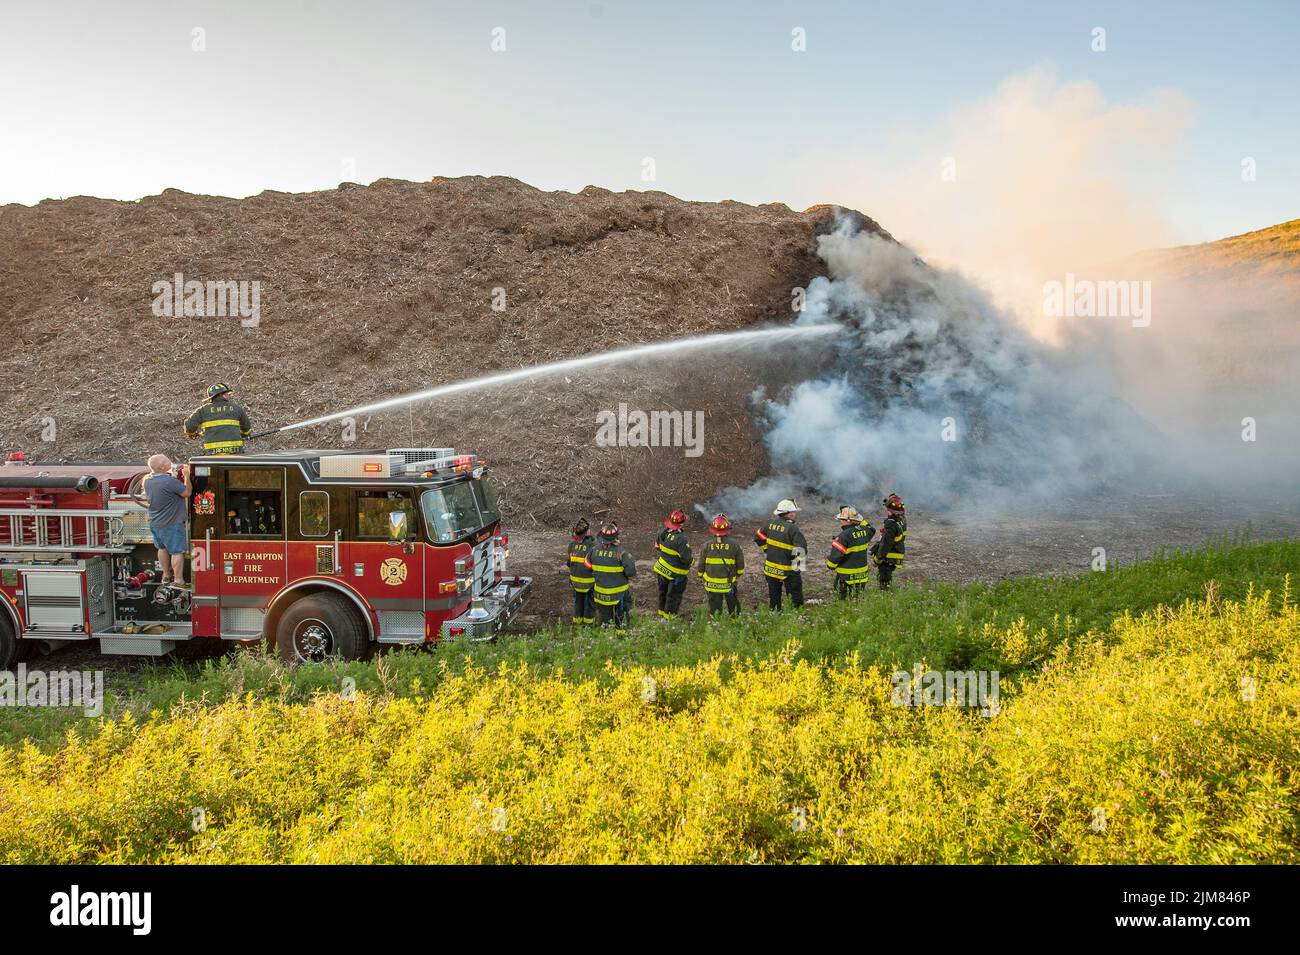 At roughly 5:15 a.m. on the morning of June 30th, 2016, East Hampton Fire Department chiefs were called to the area of Accabonac Road and Addie Conkli Stock Photo